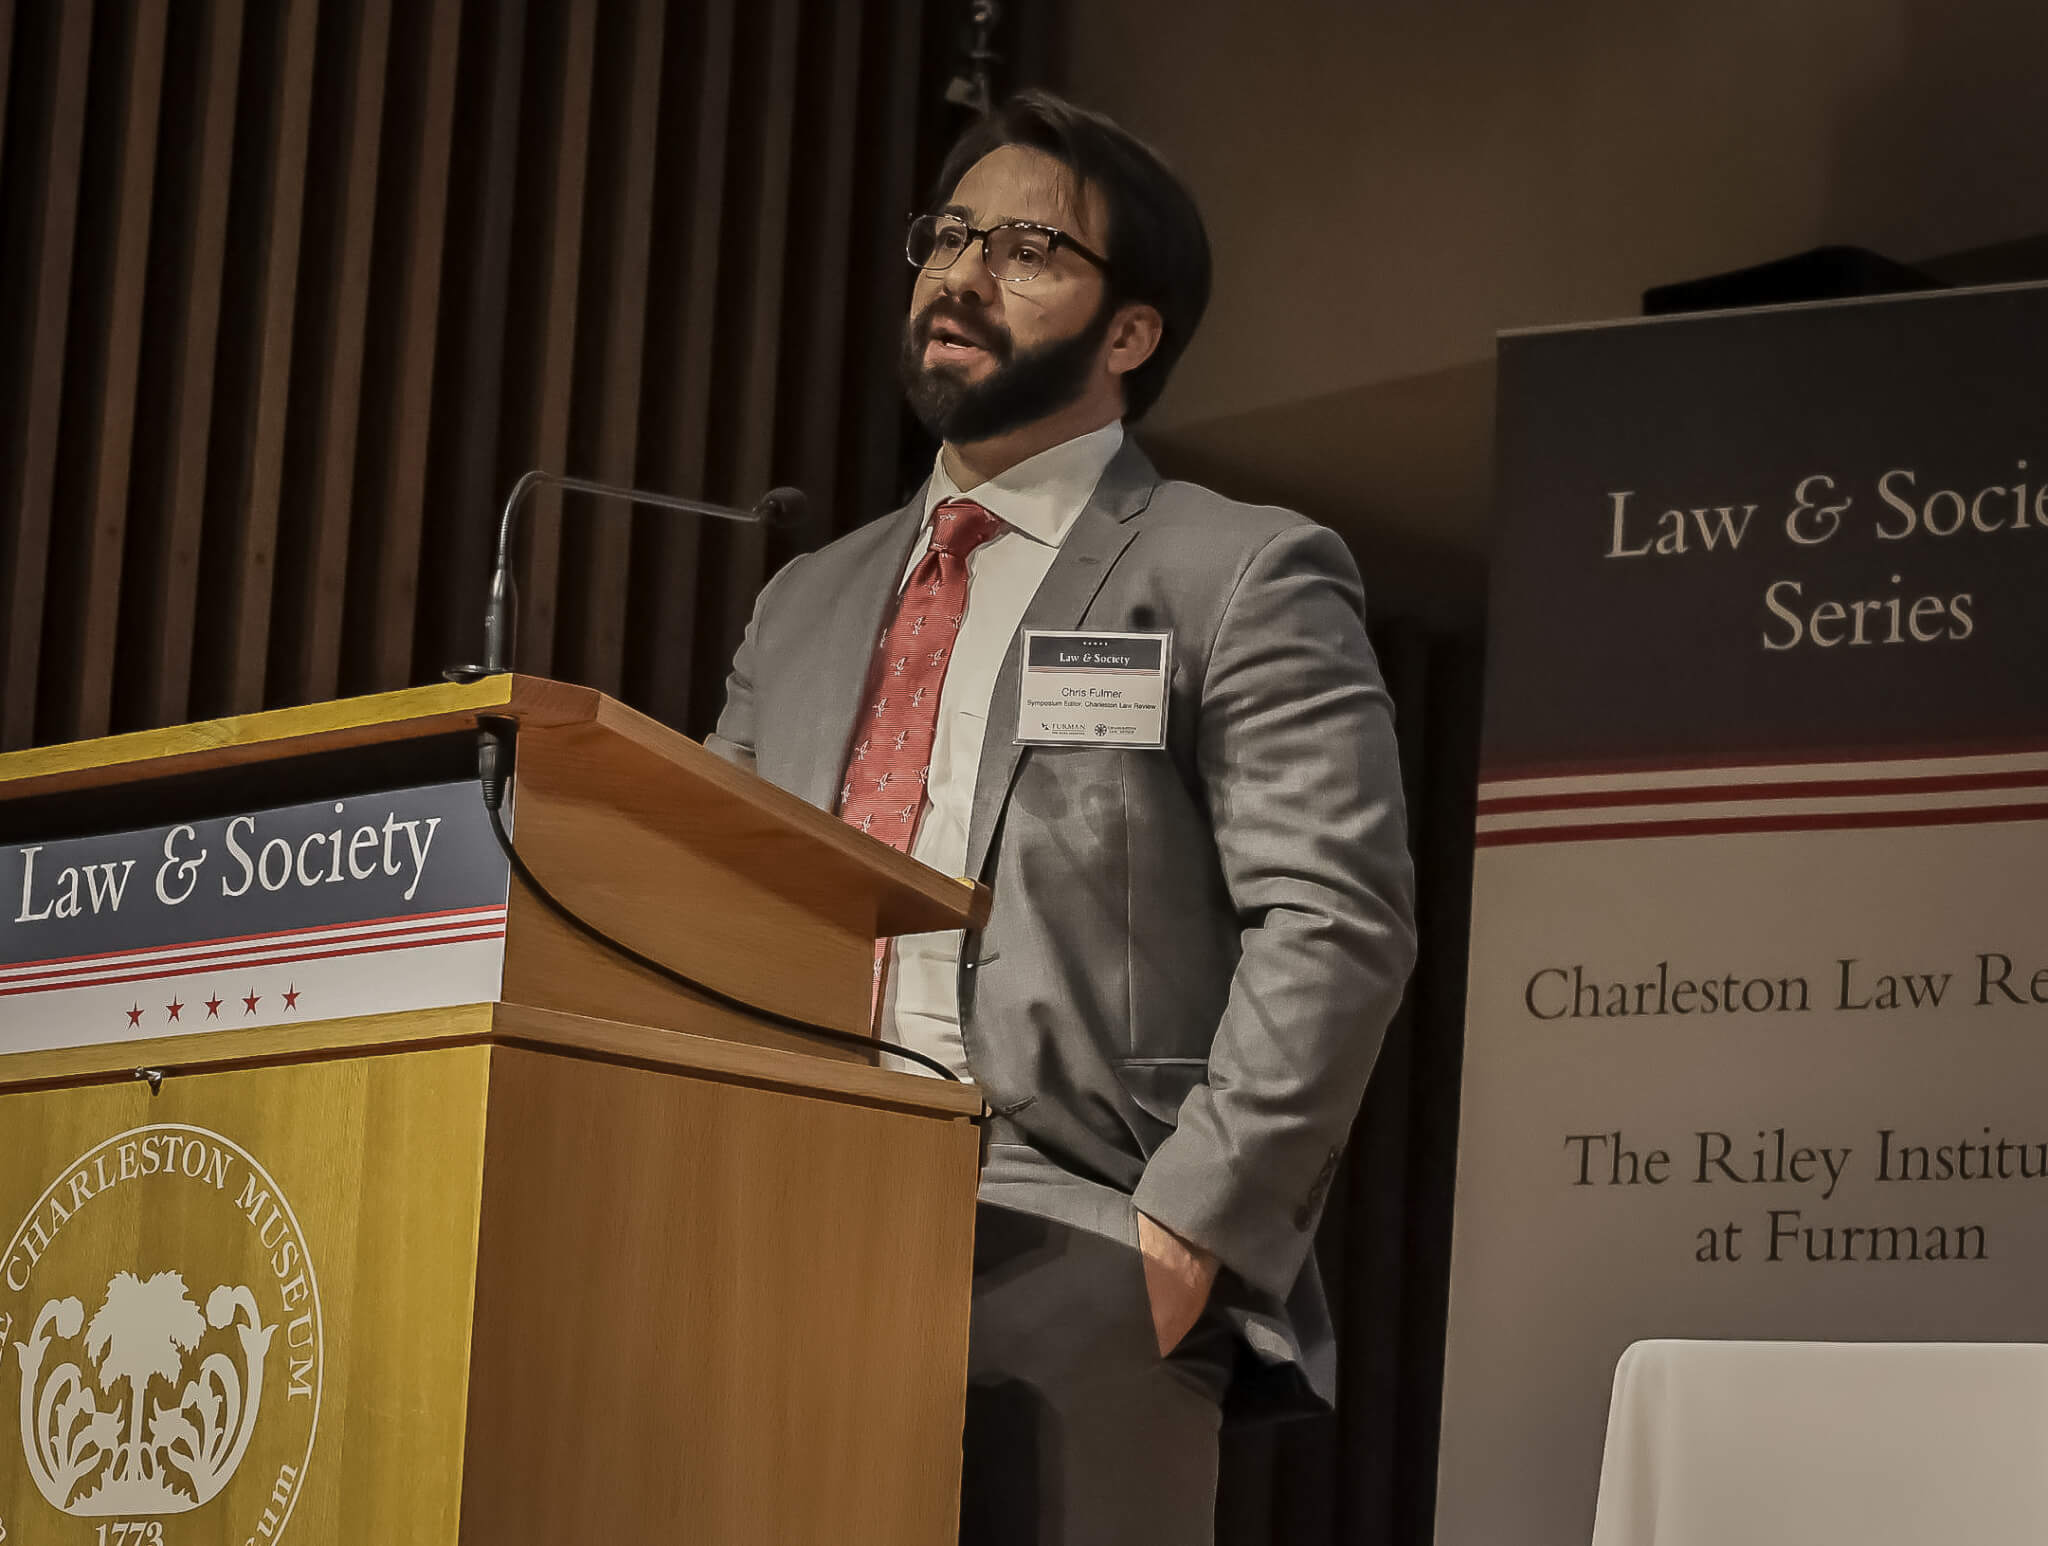 Annual Law & Society symposium to address regional impact of climate change